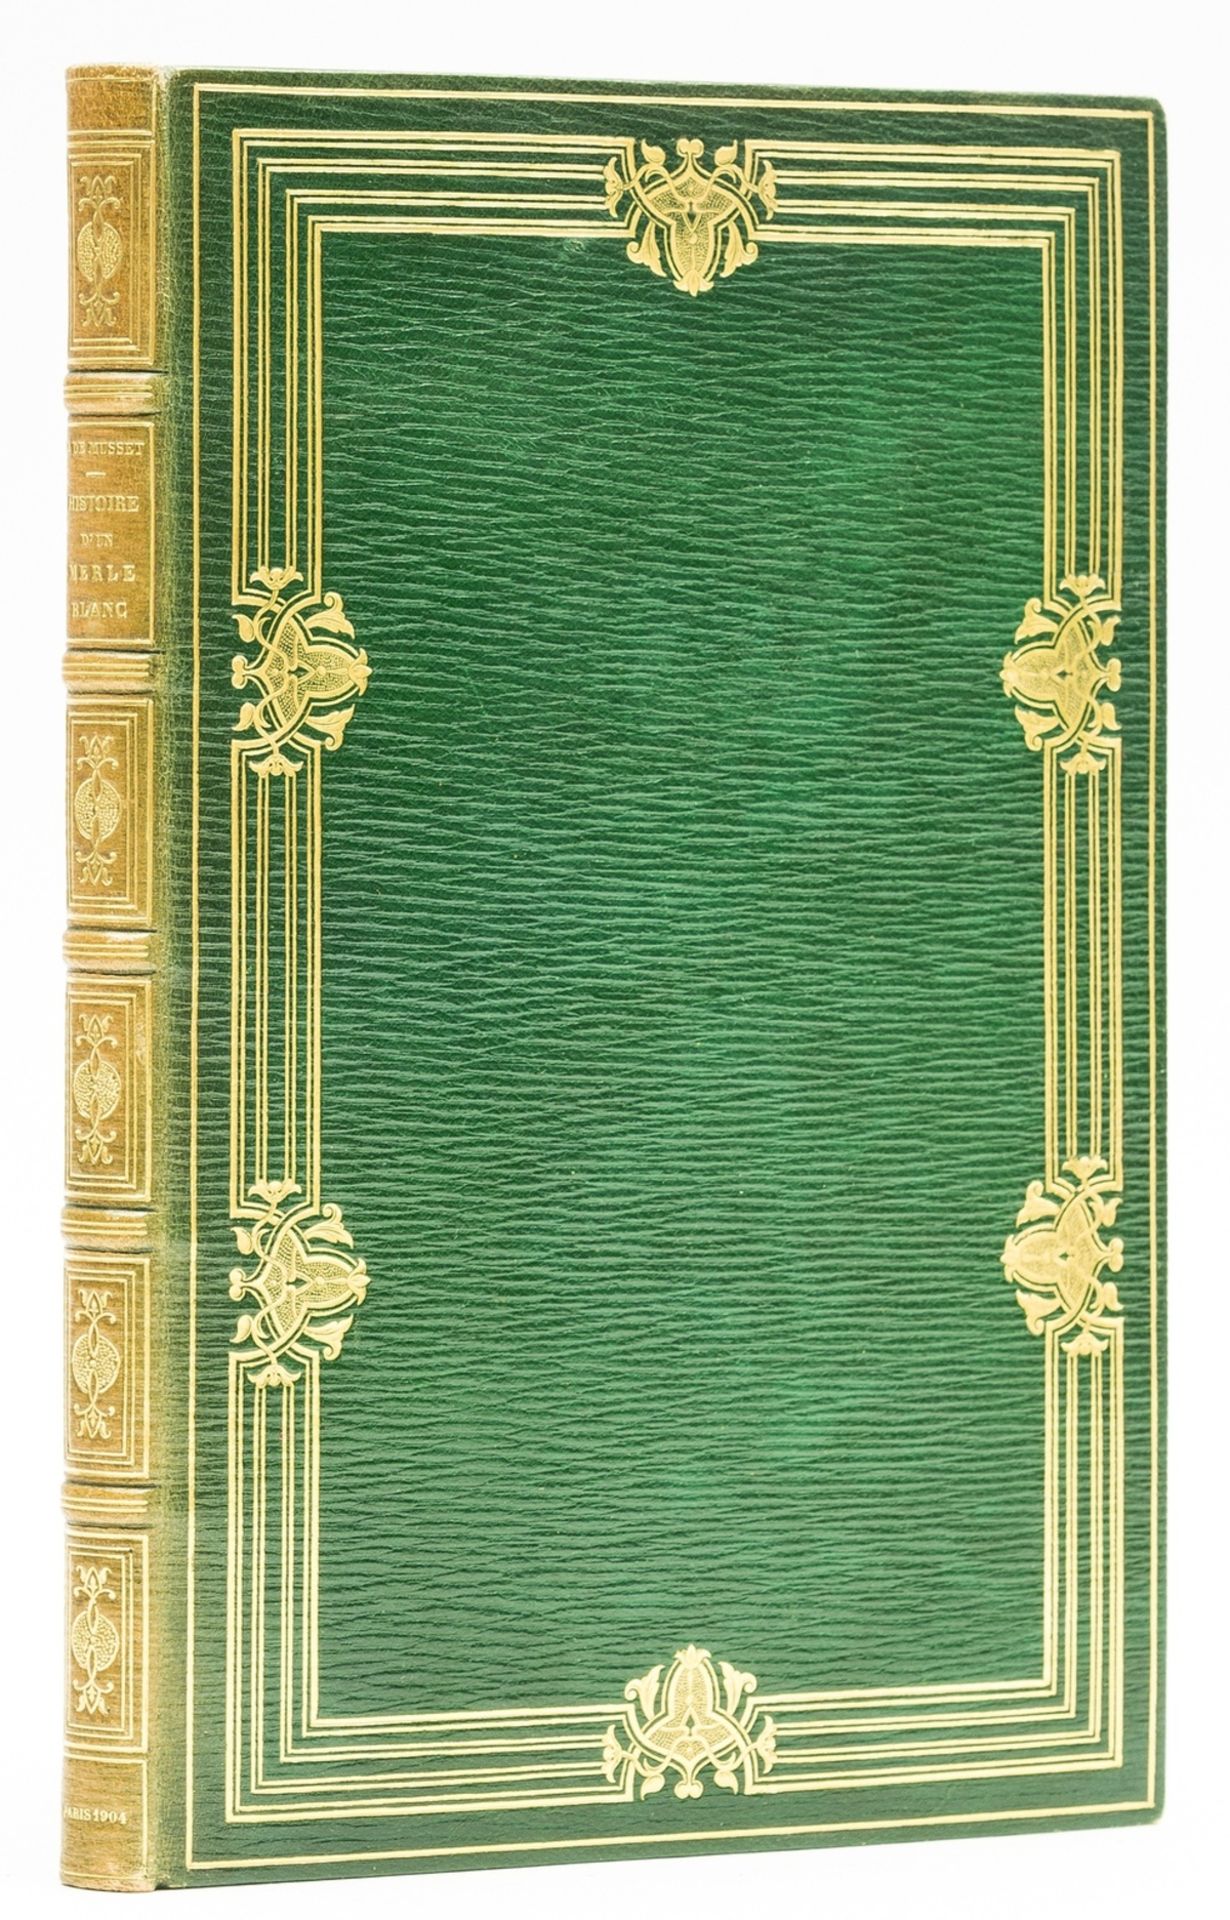 Binding.- Musset (Alfred de) Histoire d'un Merle Blanc, one of 200 grand luxe copies, illustrated …